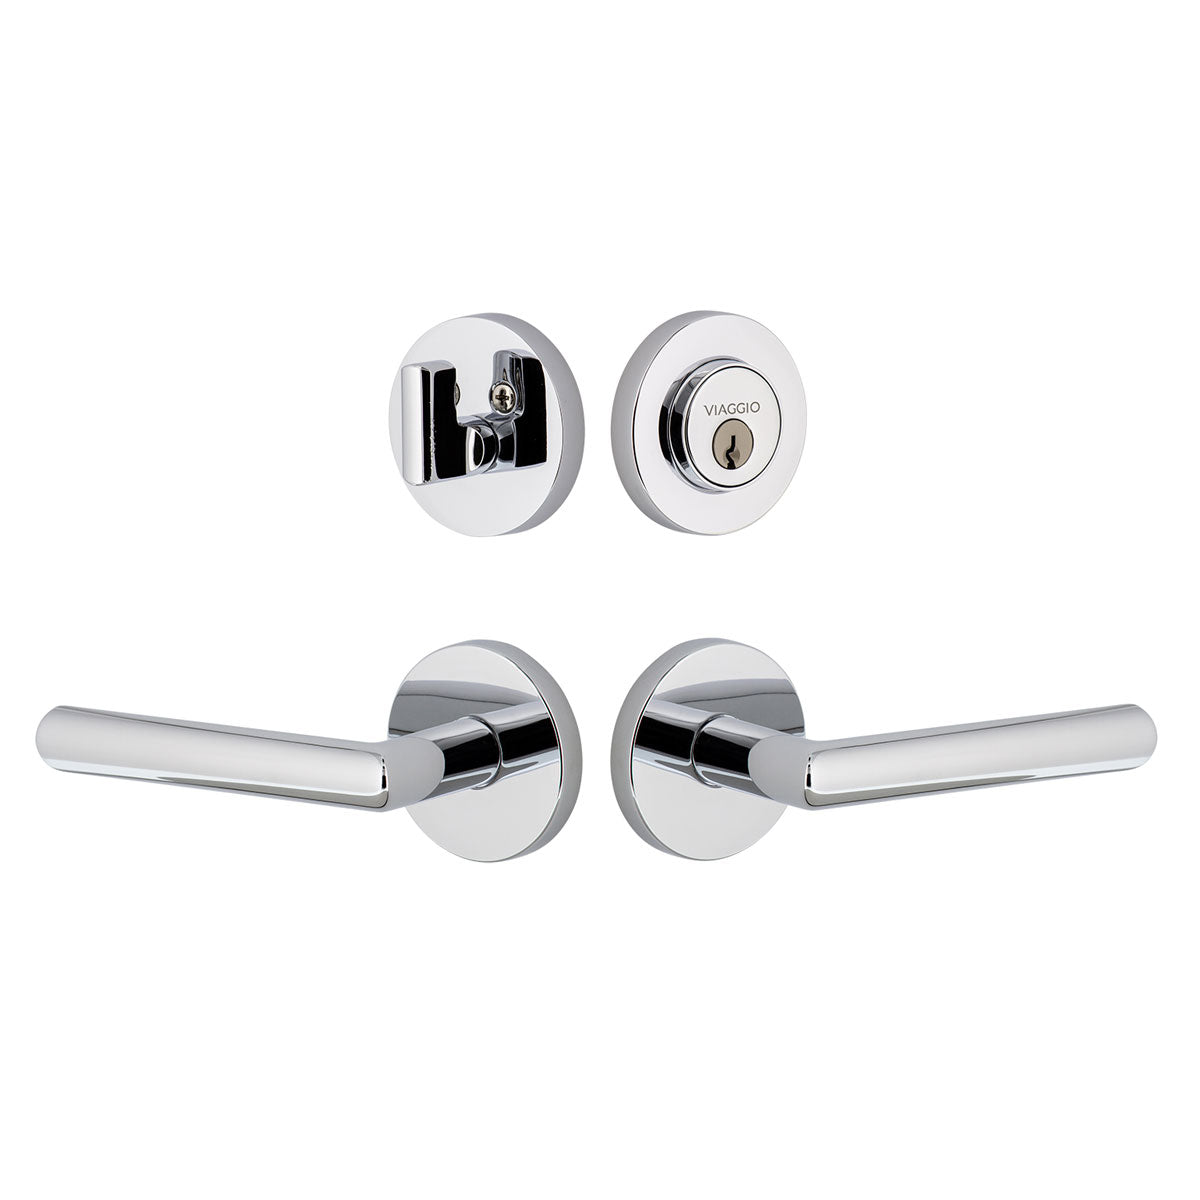 Circolo Rosette Entry Set with Moderno Lever in Bright Chrome